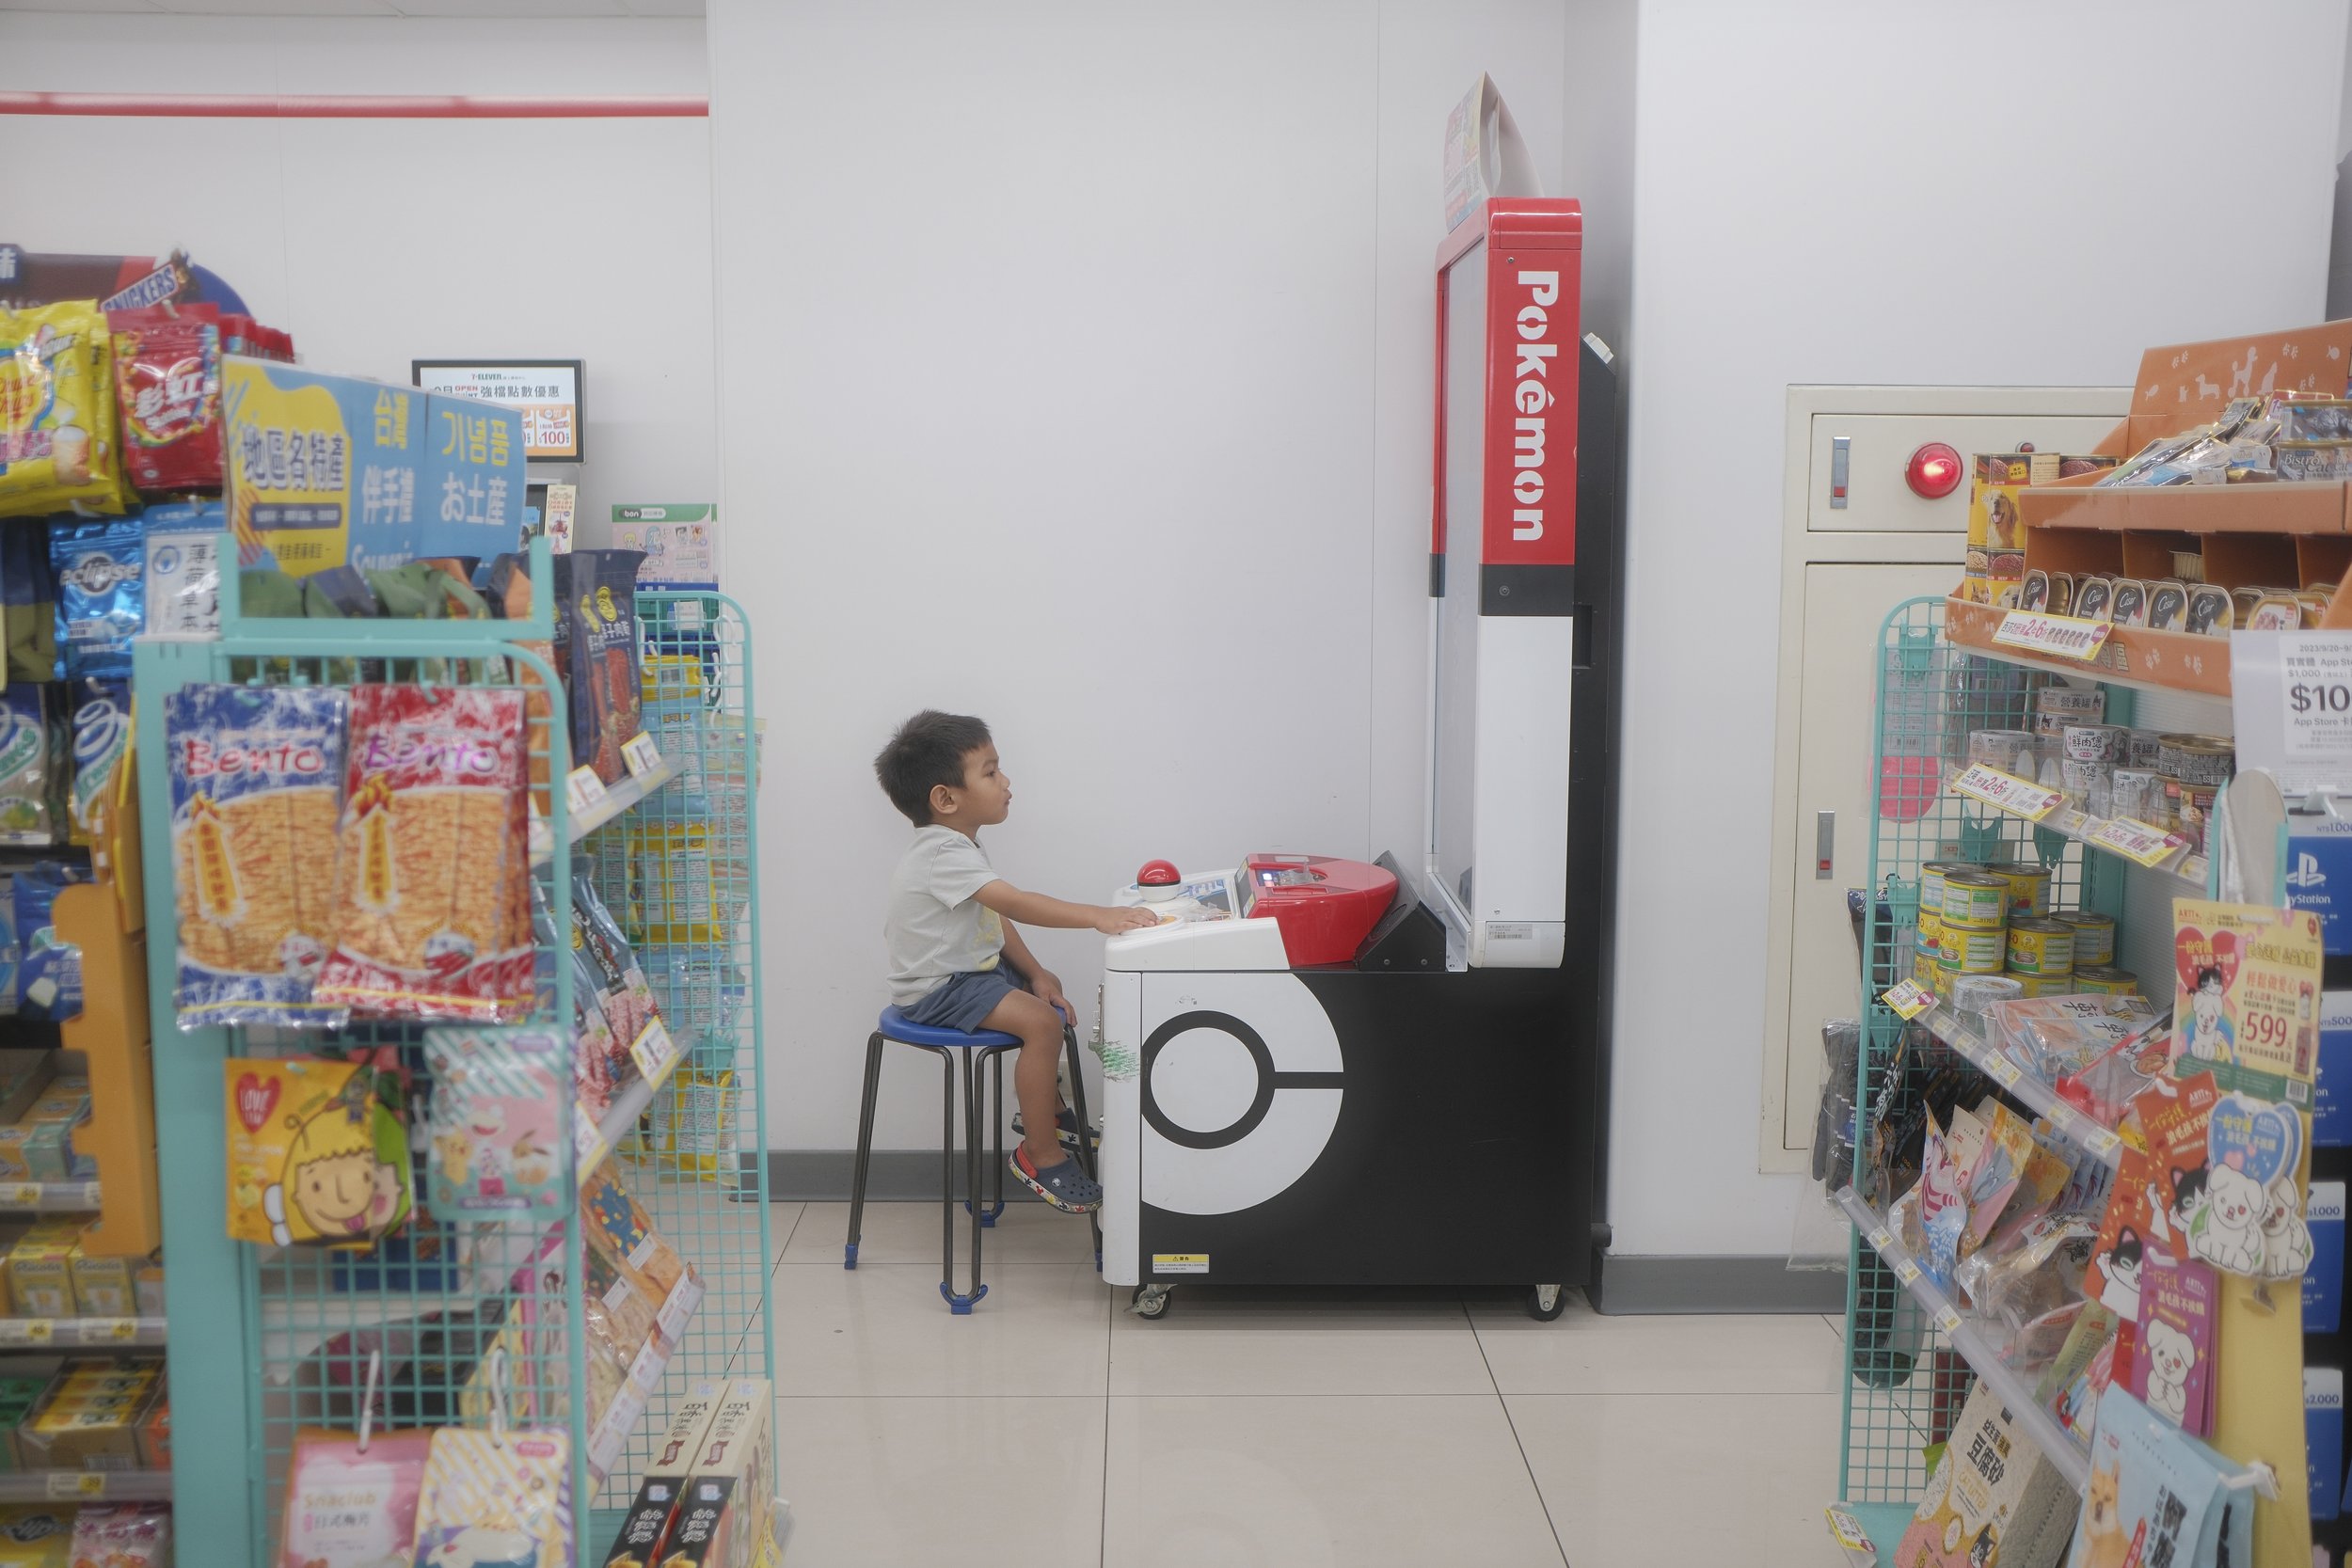  Daniel loves these little pop-up game stations in their convenience stores. 